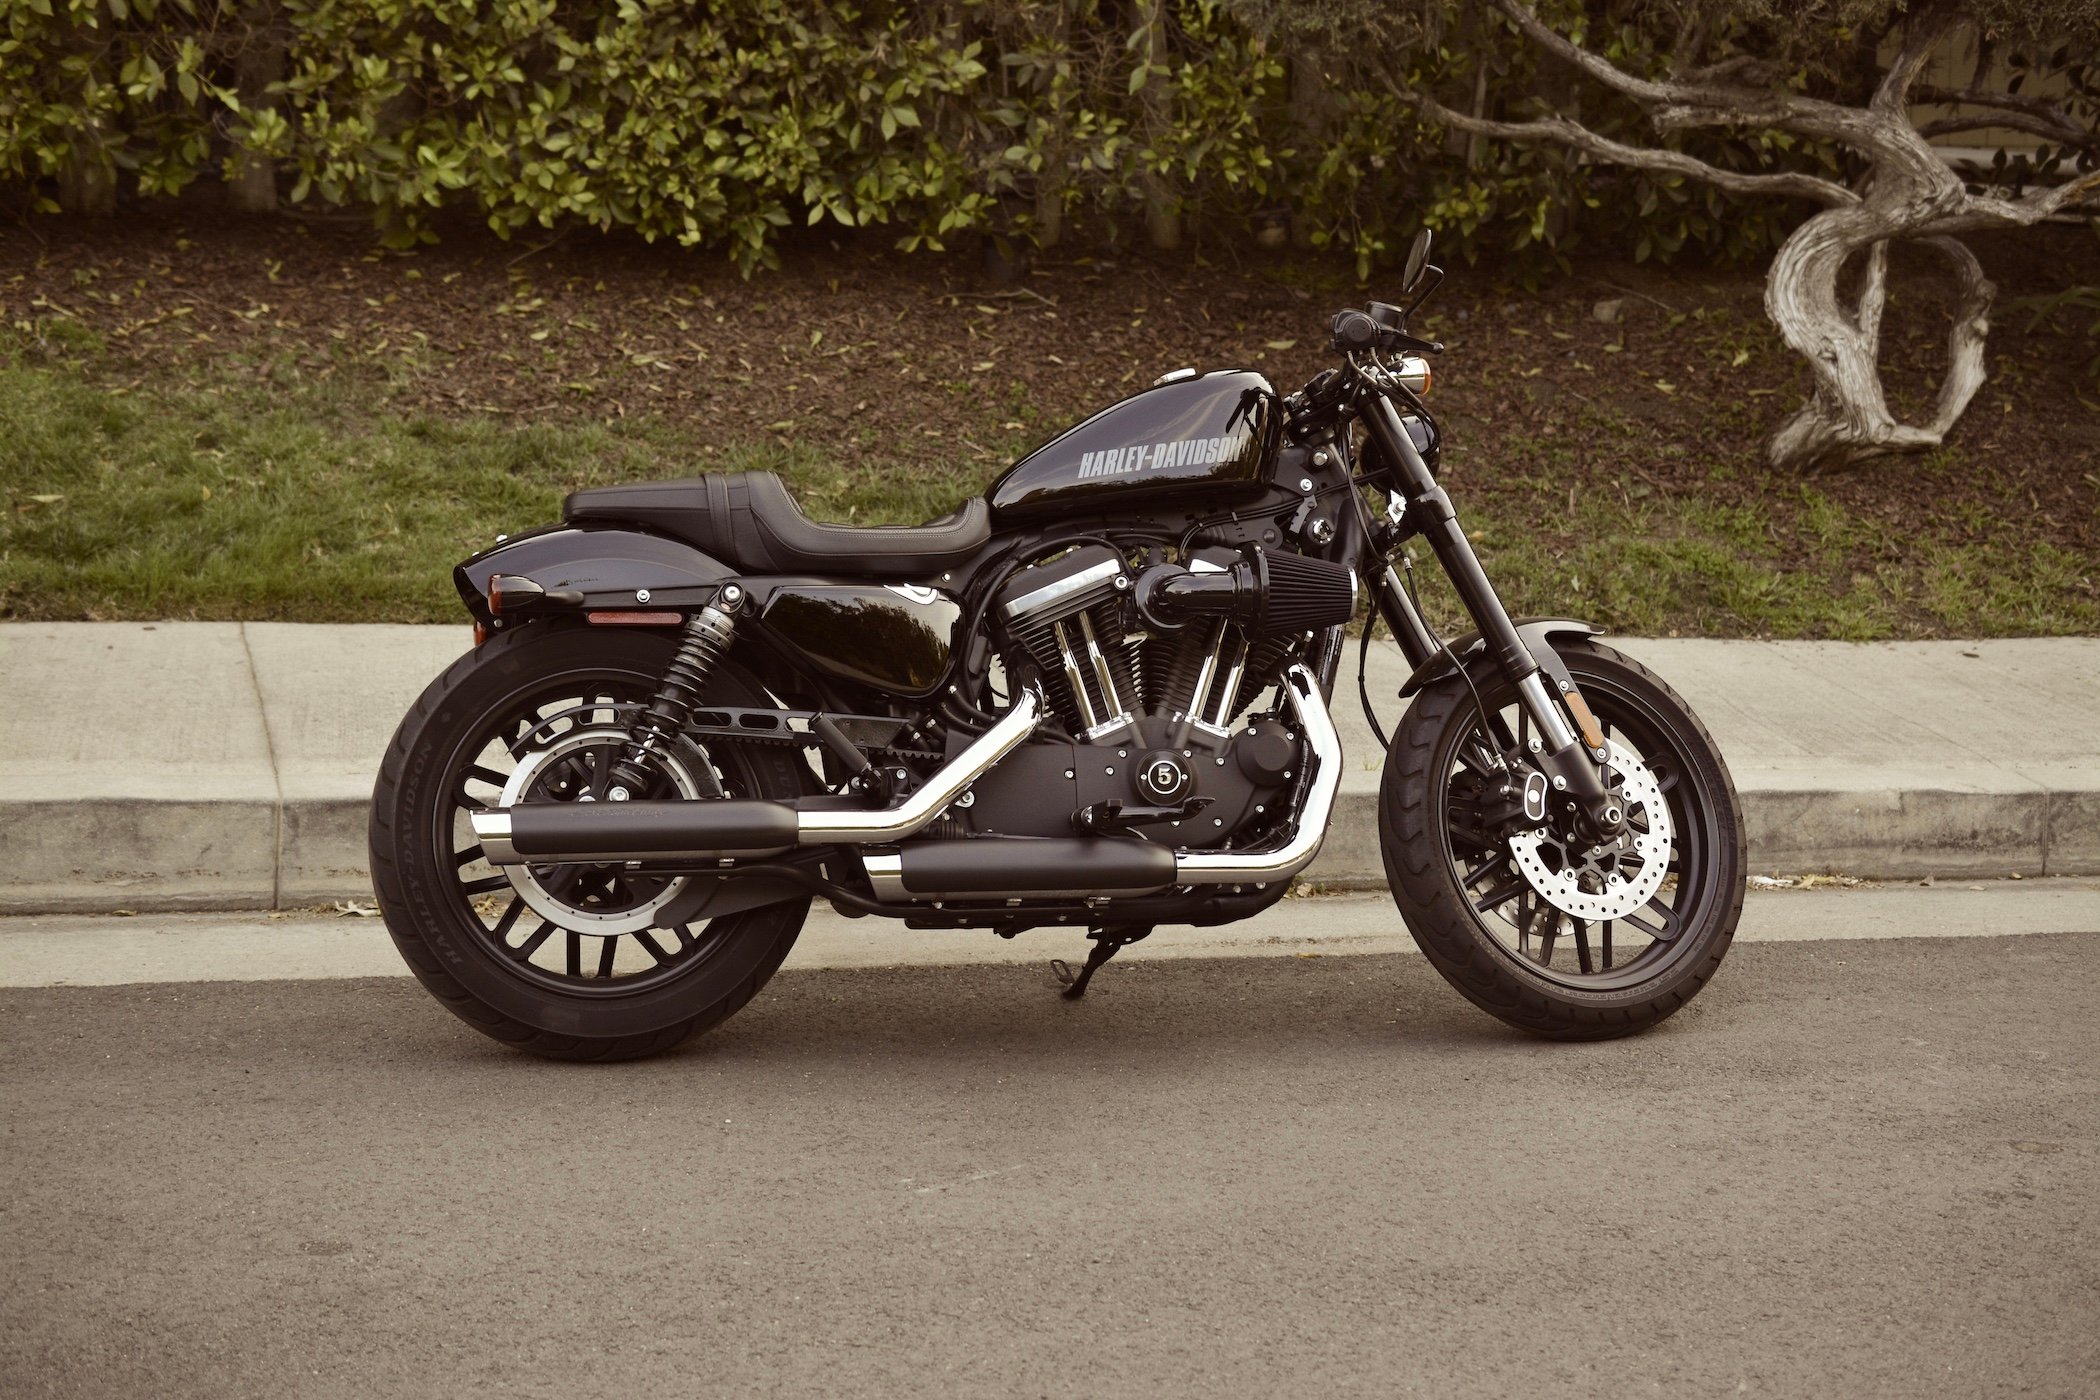 The Petrolhead Corner - 67 Years of the Iconic Harley Davidson Sportster